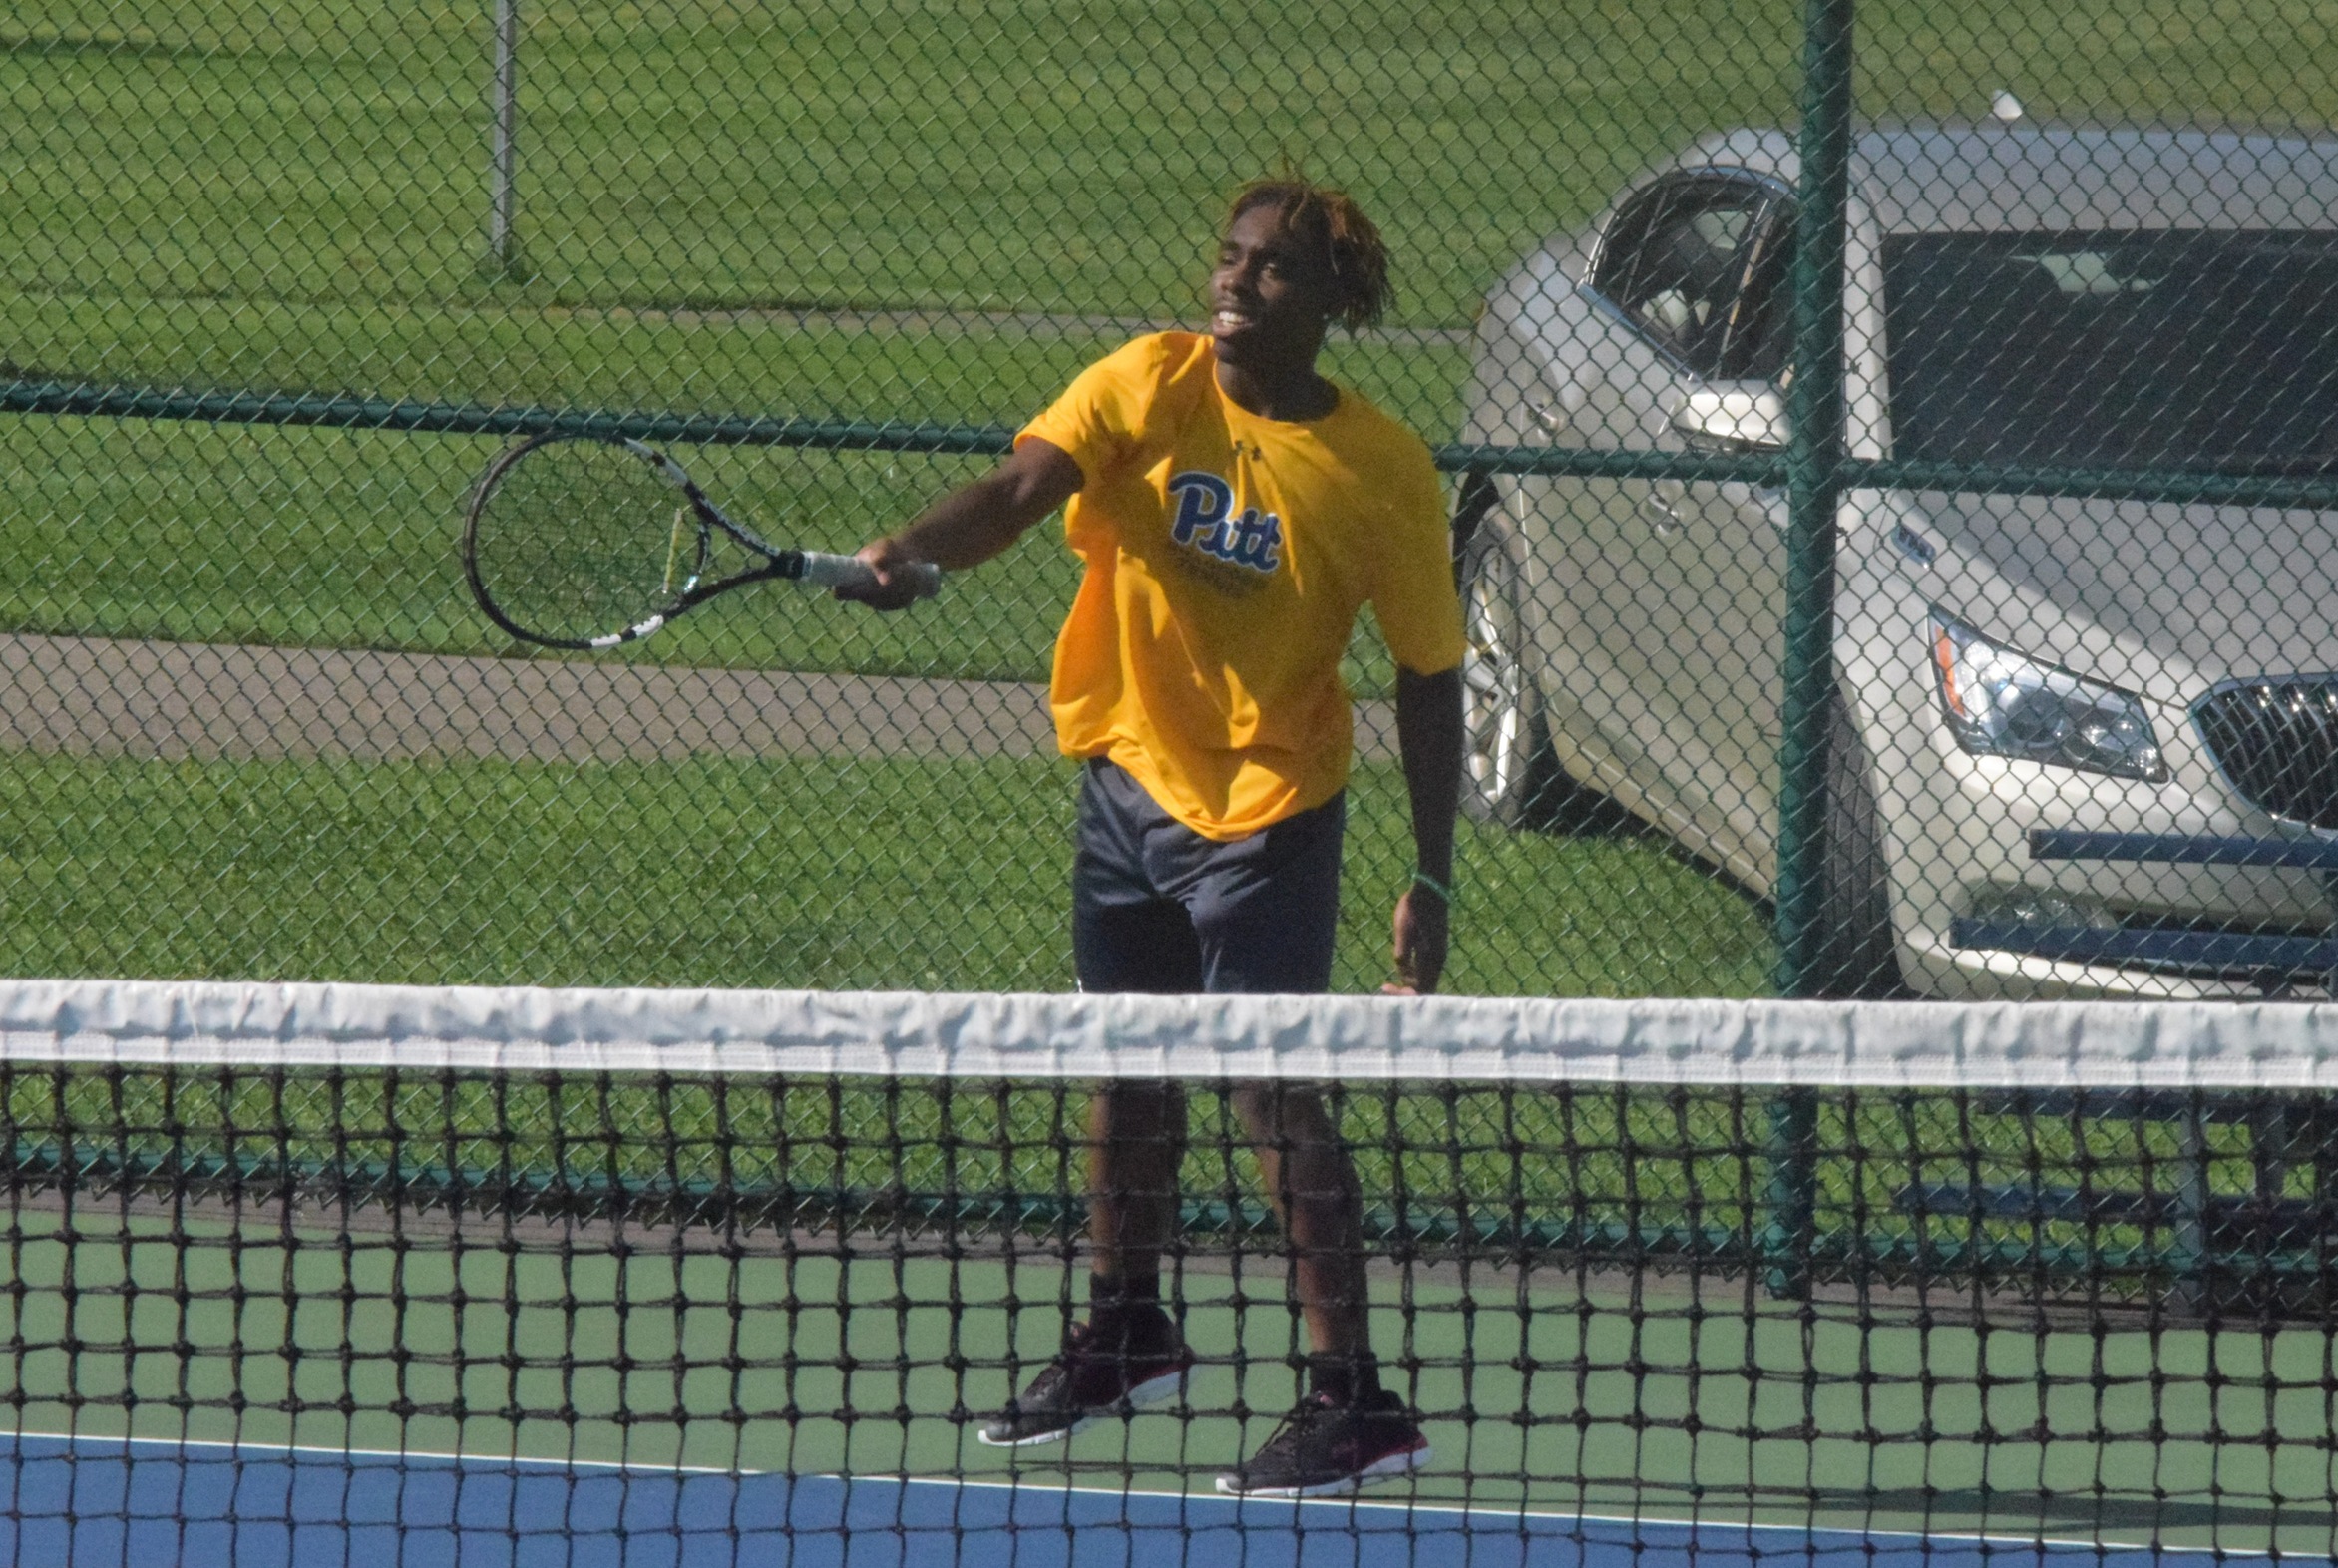 Maduakor Wins Two as Panthers Fall to Bobcats